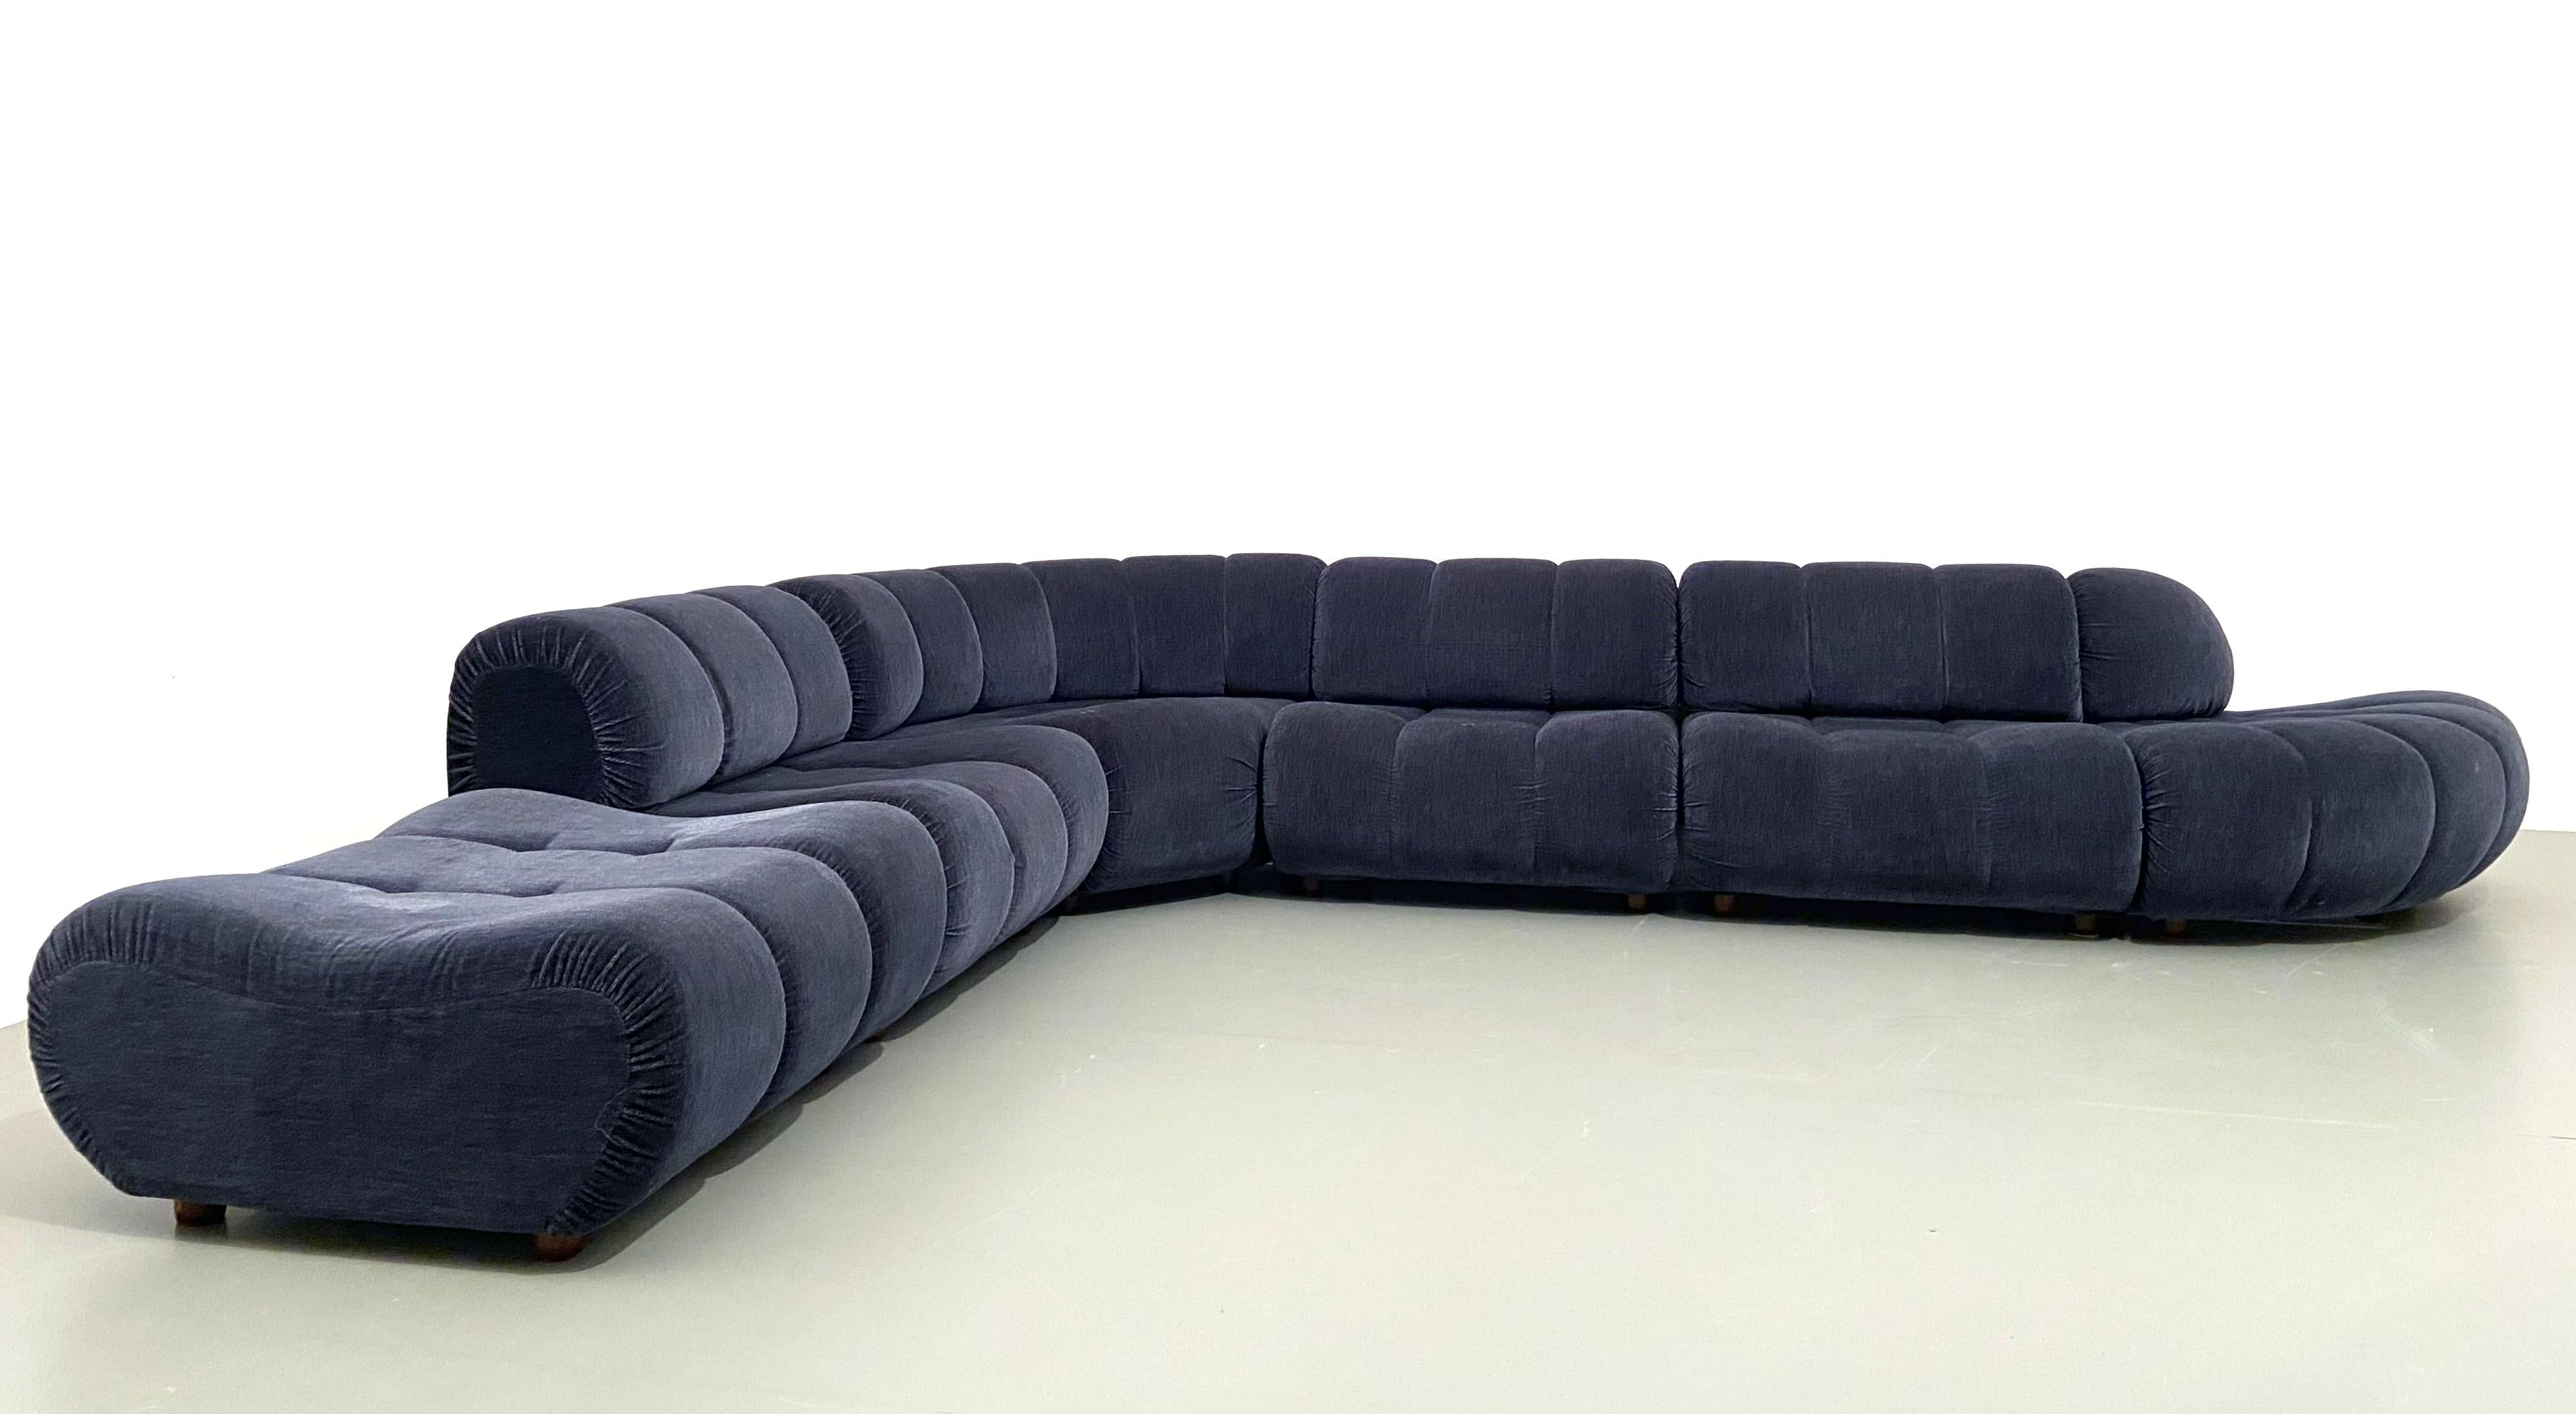 Sectional sofa by Giuseppe Munari for Poltrona Munari, Italy, 1970's.

New in our collection: a large 6 piece modular sofa in dark blue velvet by Giuseppe Munari. Many configuration possible as you can see because all pieces can be moved